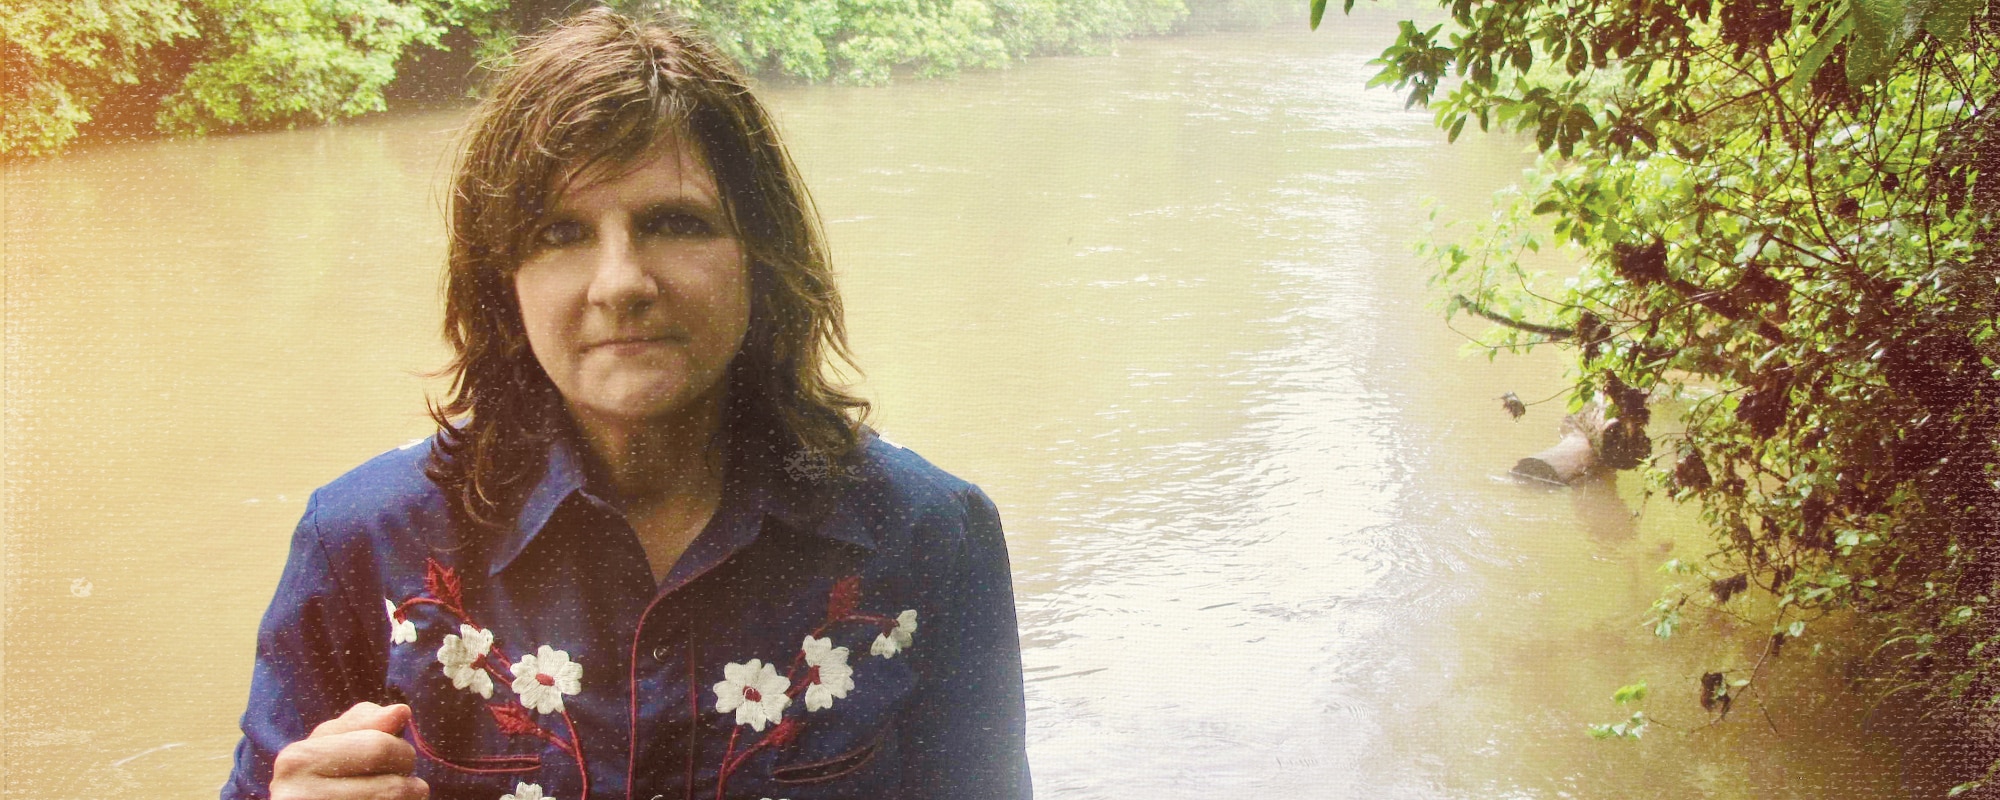 Indigo Girls’ Amy Ray Brings Activism To Song With Solo Project Song, “Tear It Down”